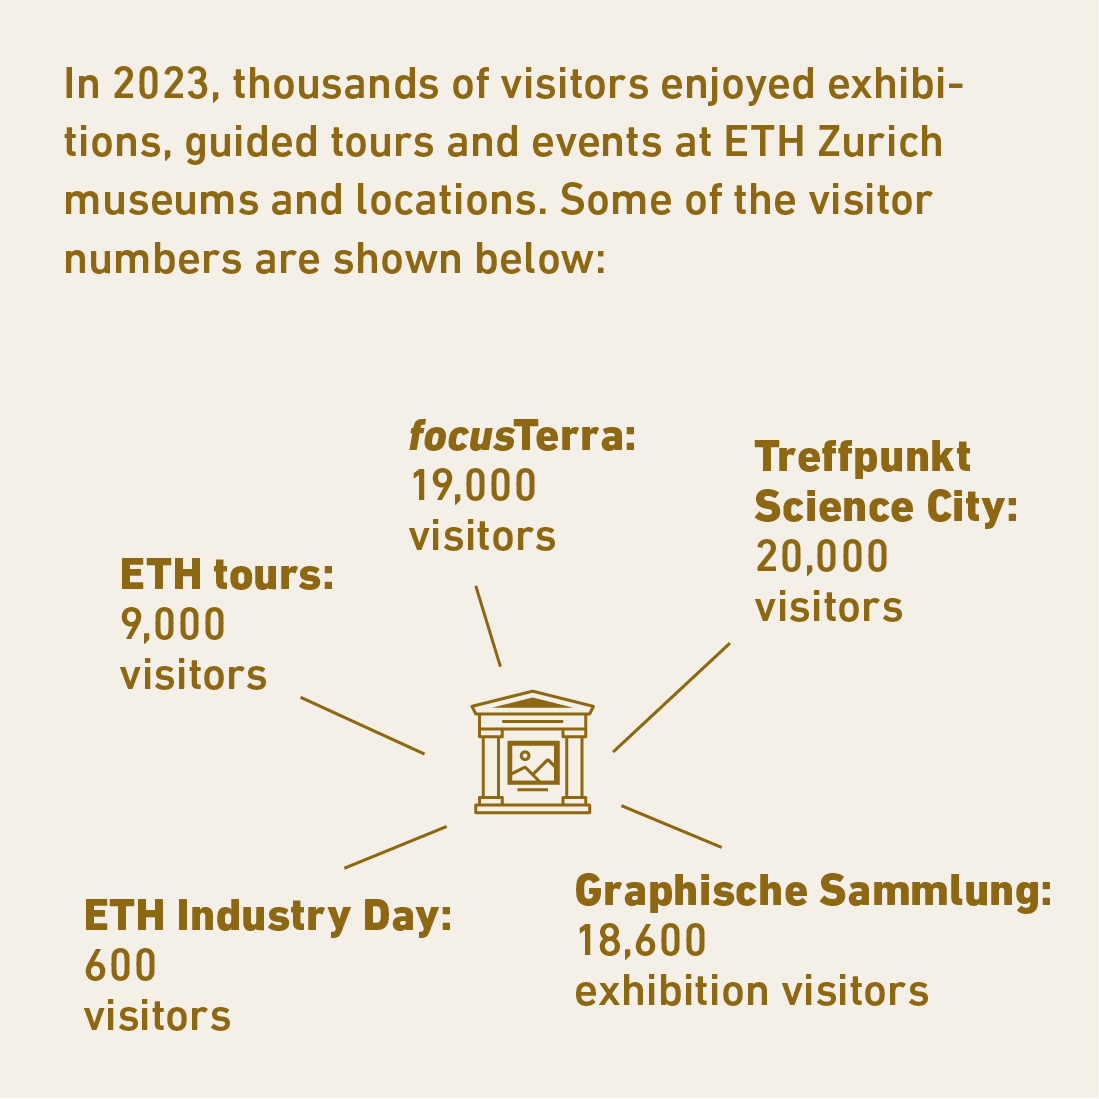 In twenty twenty-three, thousands of visitors enjoyed exhibitions, guided tours and events at ETH Zurich museums and locations. Some of the visitor numbers are shown. The Link goes to the Value Creation Model.